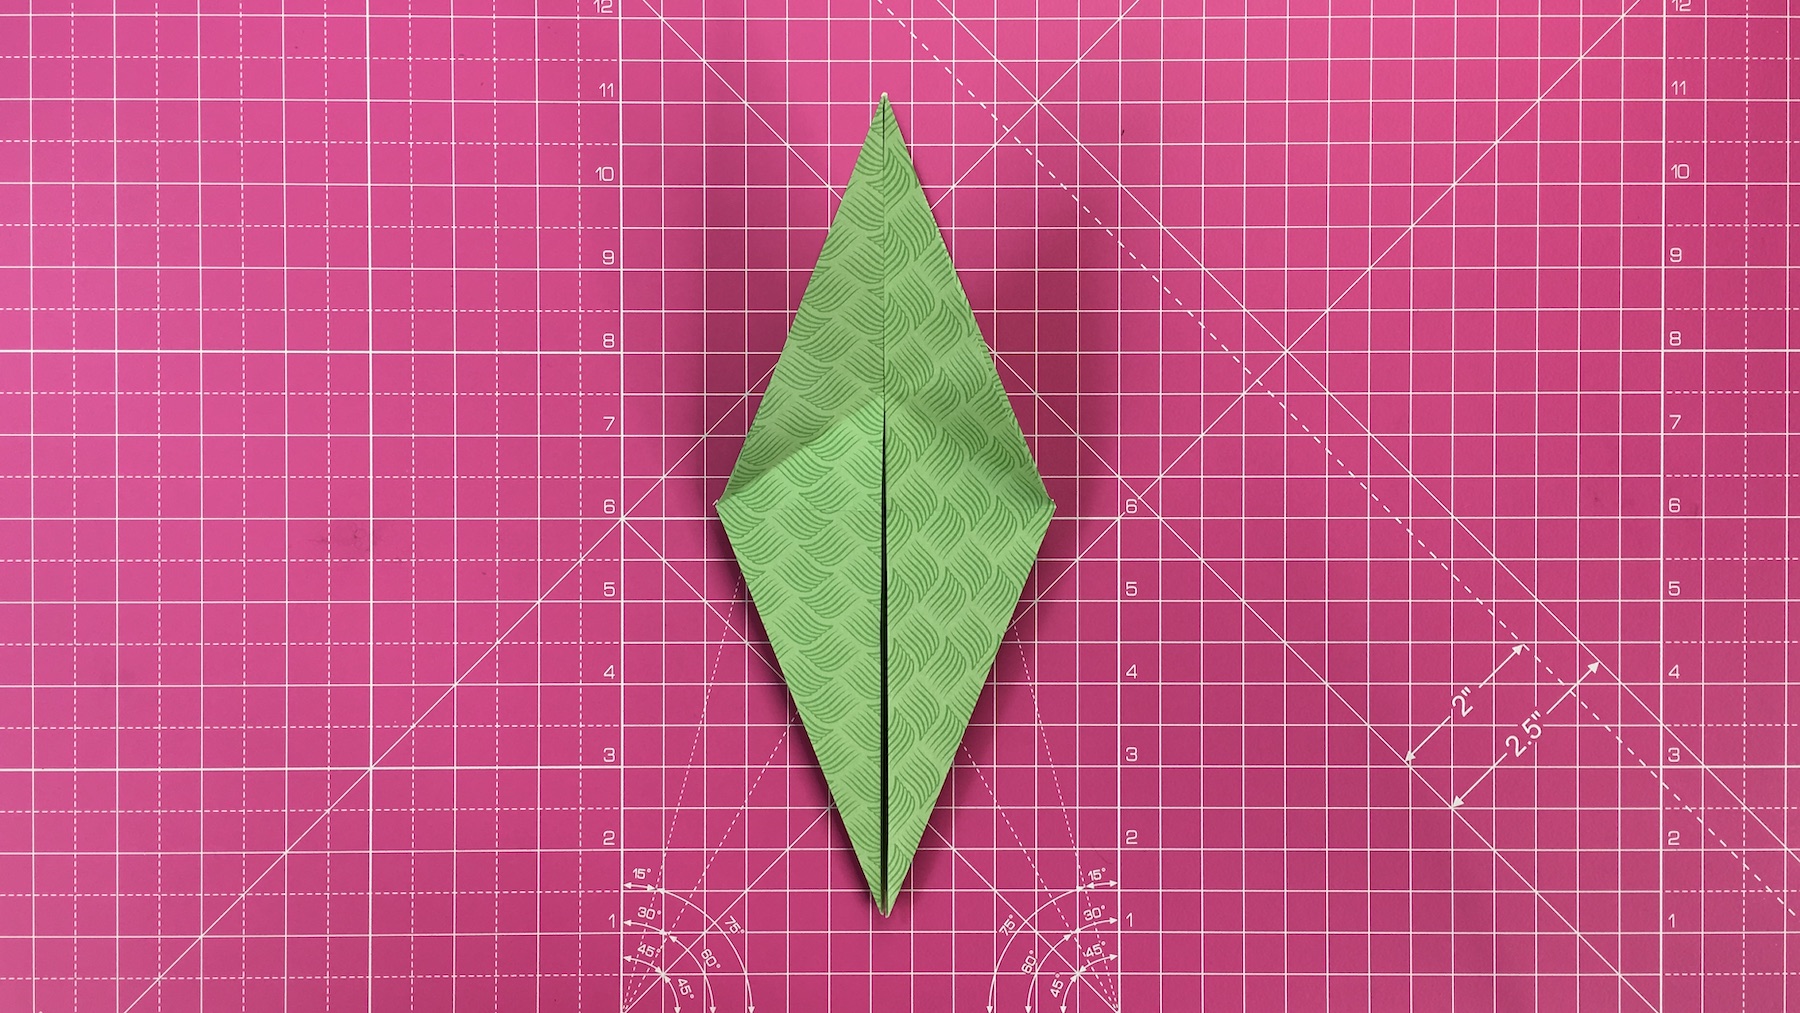 How to make an origami dragon, origami dragon tutorial - step 20